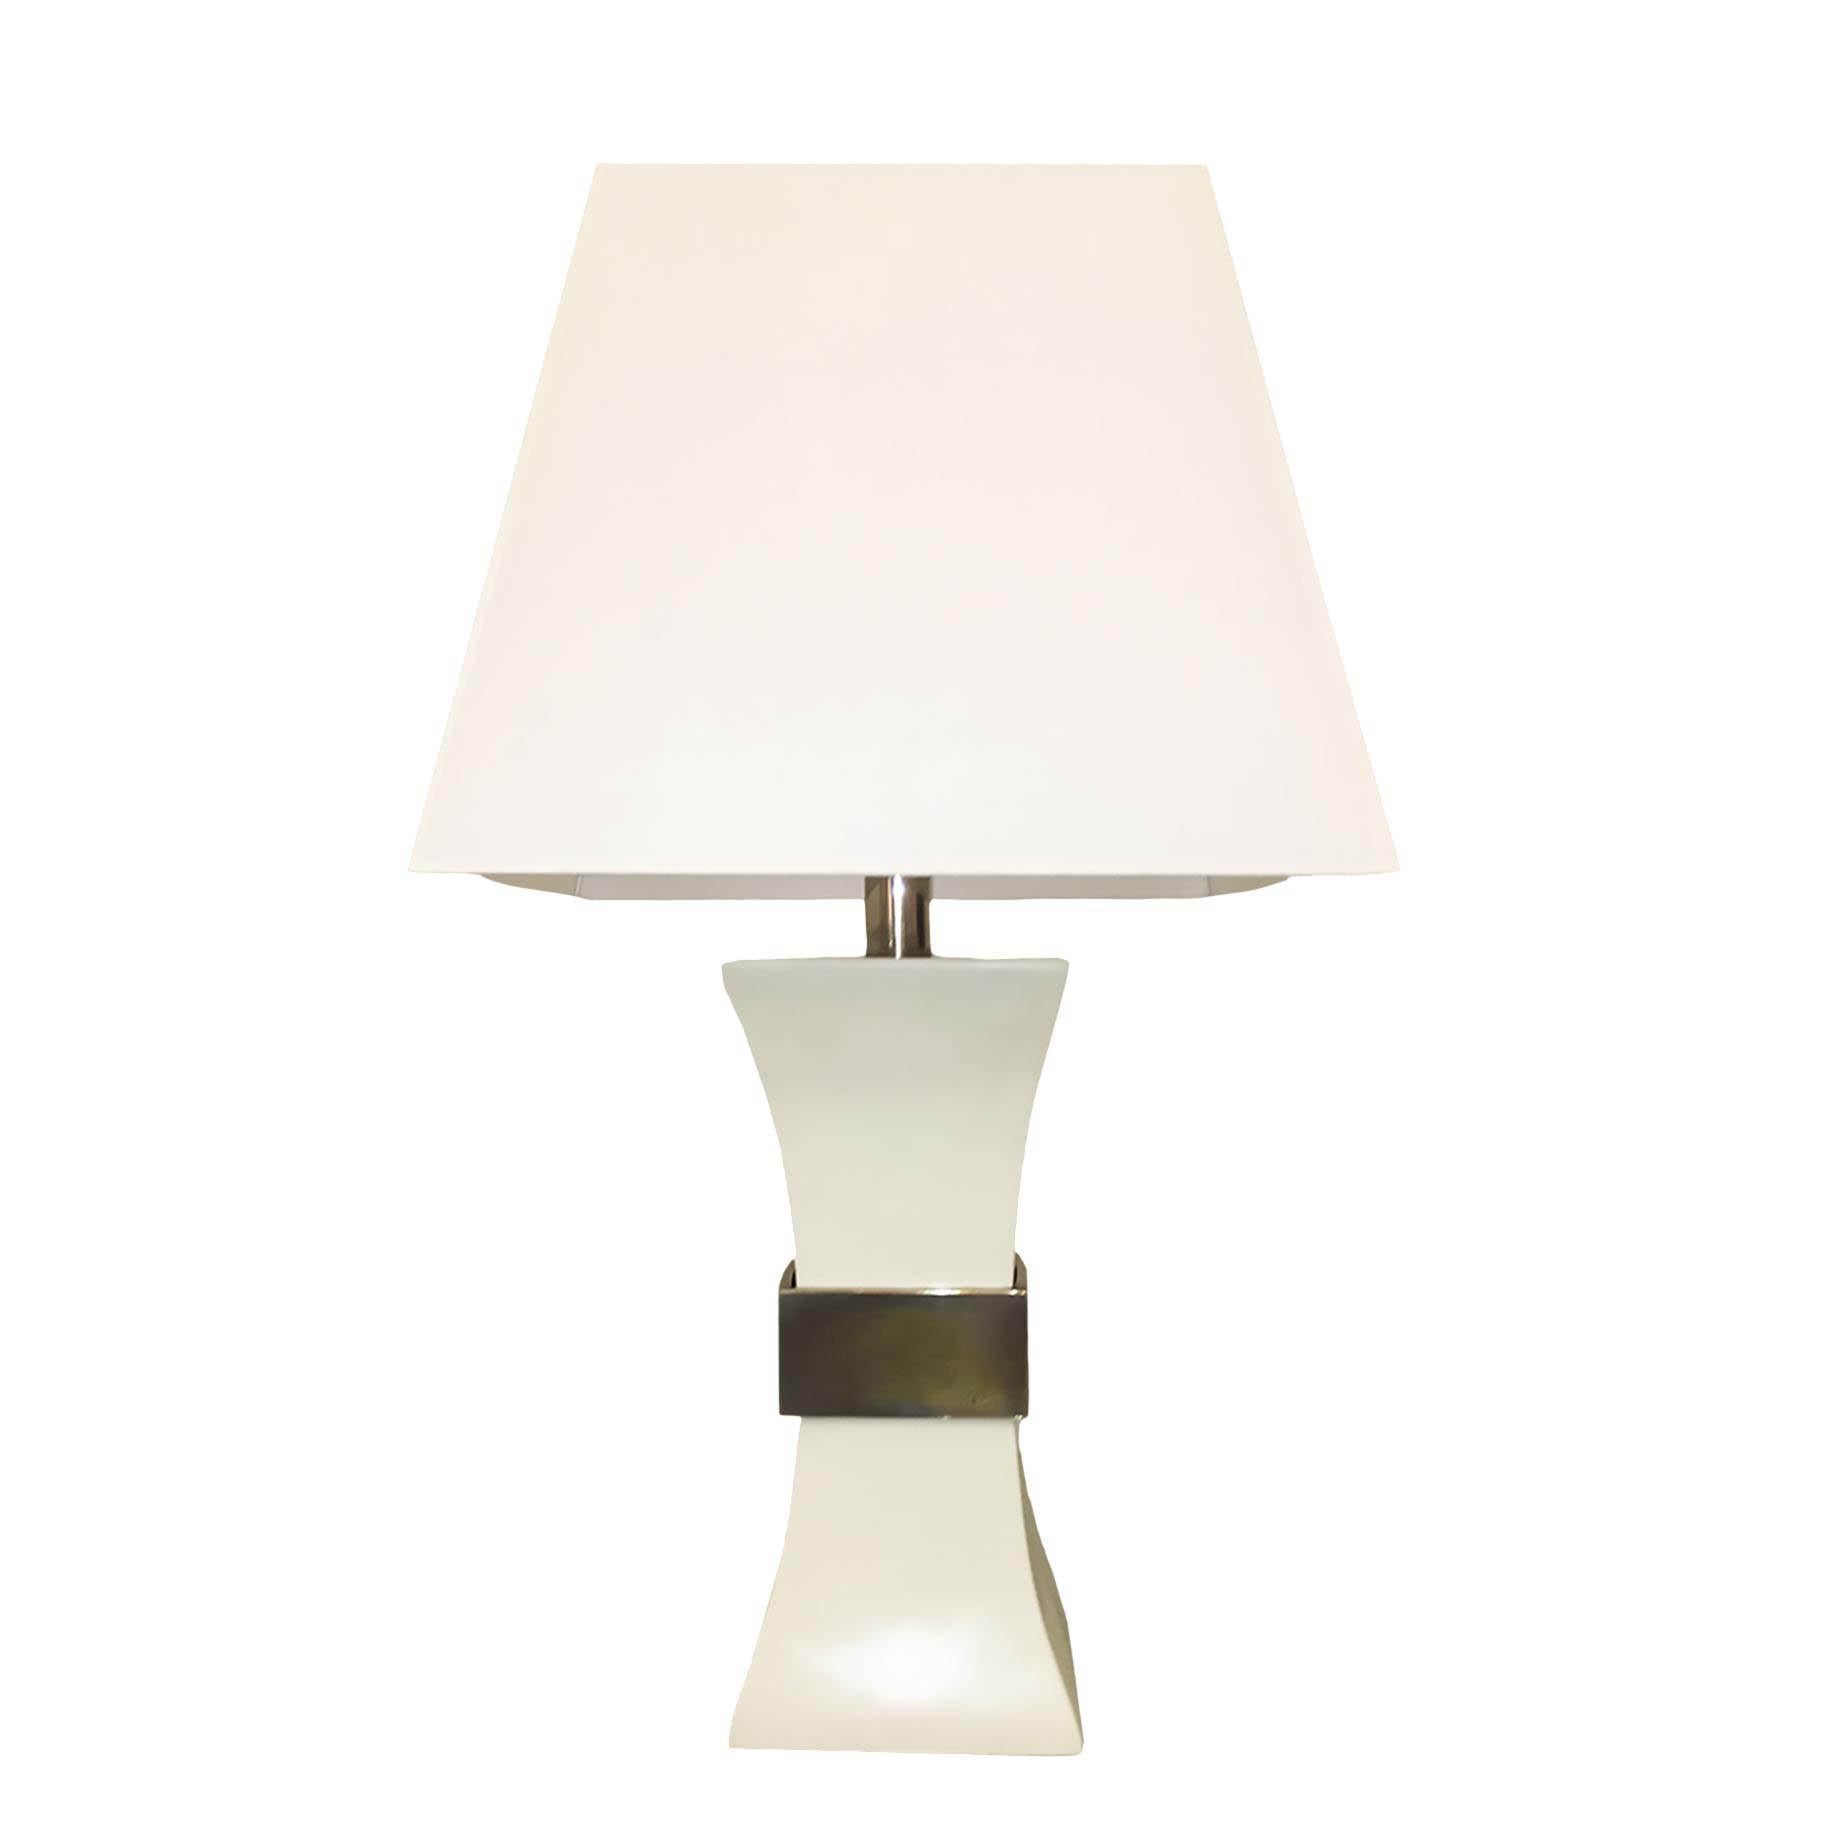 Mid-Century Modern Gabriella Crespi Table Lamp in Ceramic and Golden Brass, 1970s, Italy For Sale